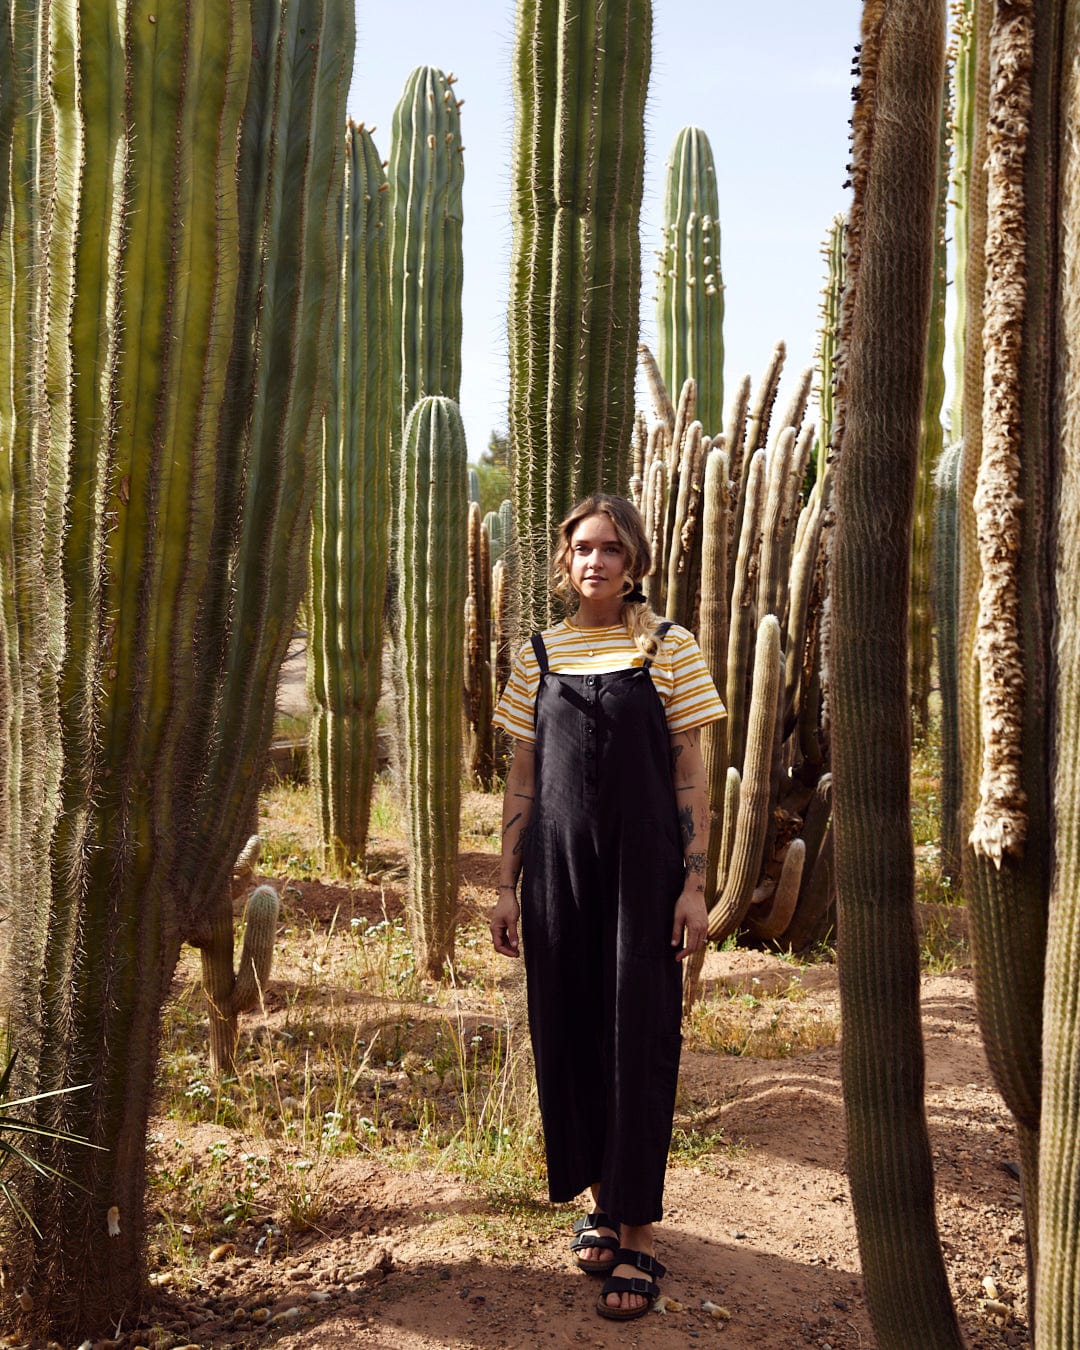 A person stands in front of tall cacti in an outdoor setting, wearing a Nancy - Womens Jumpsuit - Dark Grey by Saltrock and sandals. The relaxed fit complements the casual vibe perfectly.